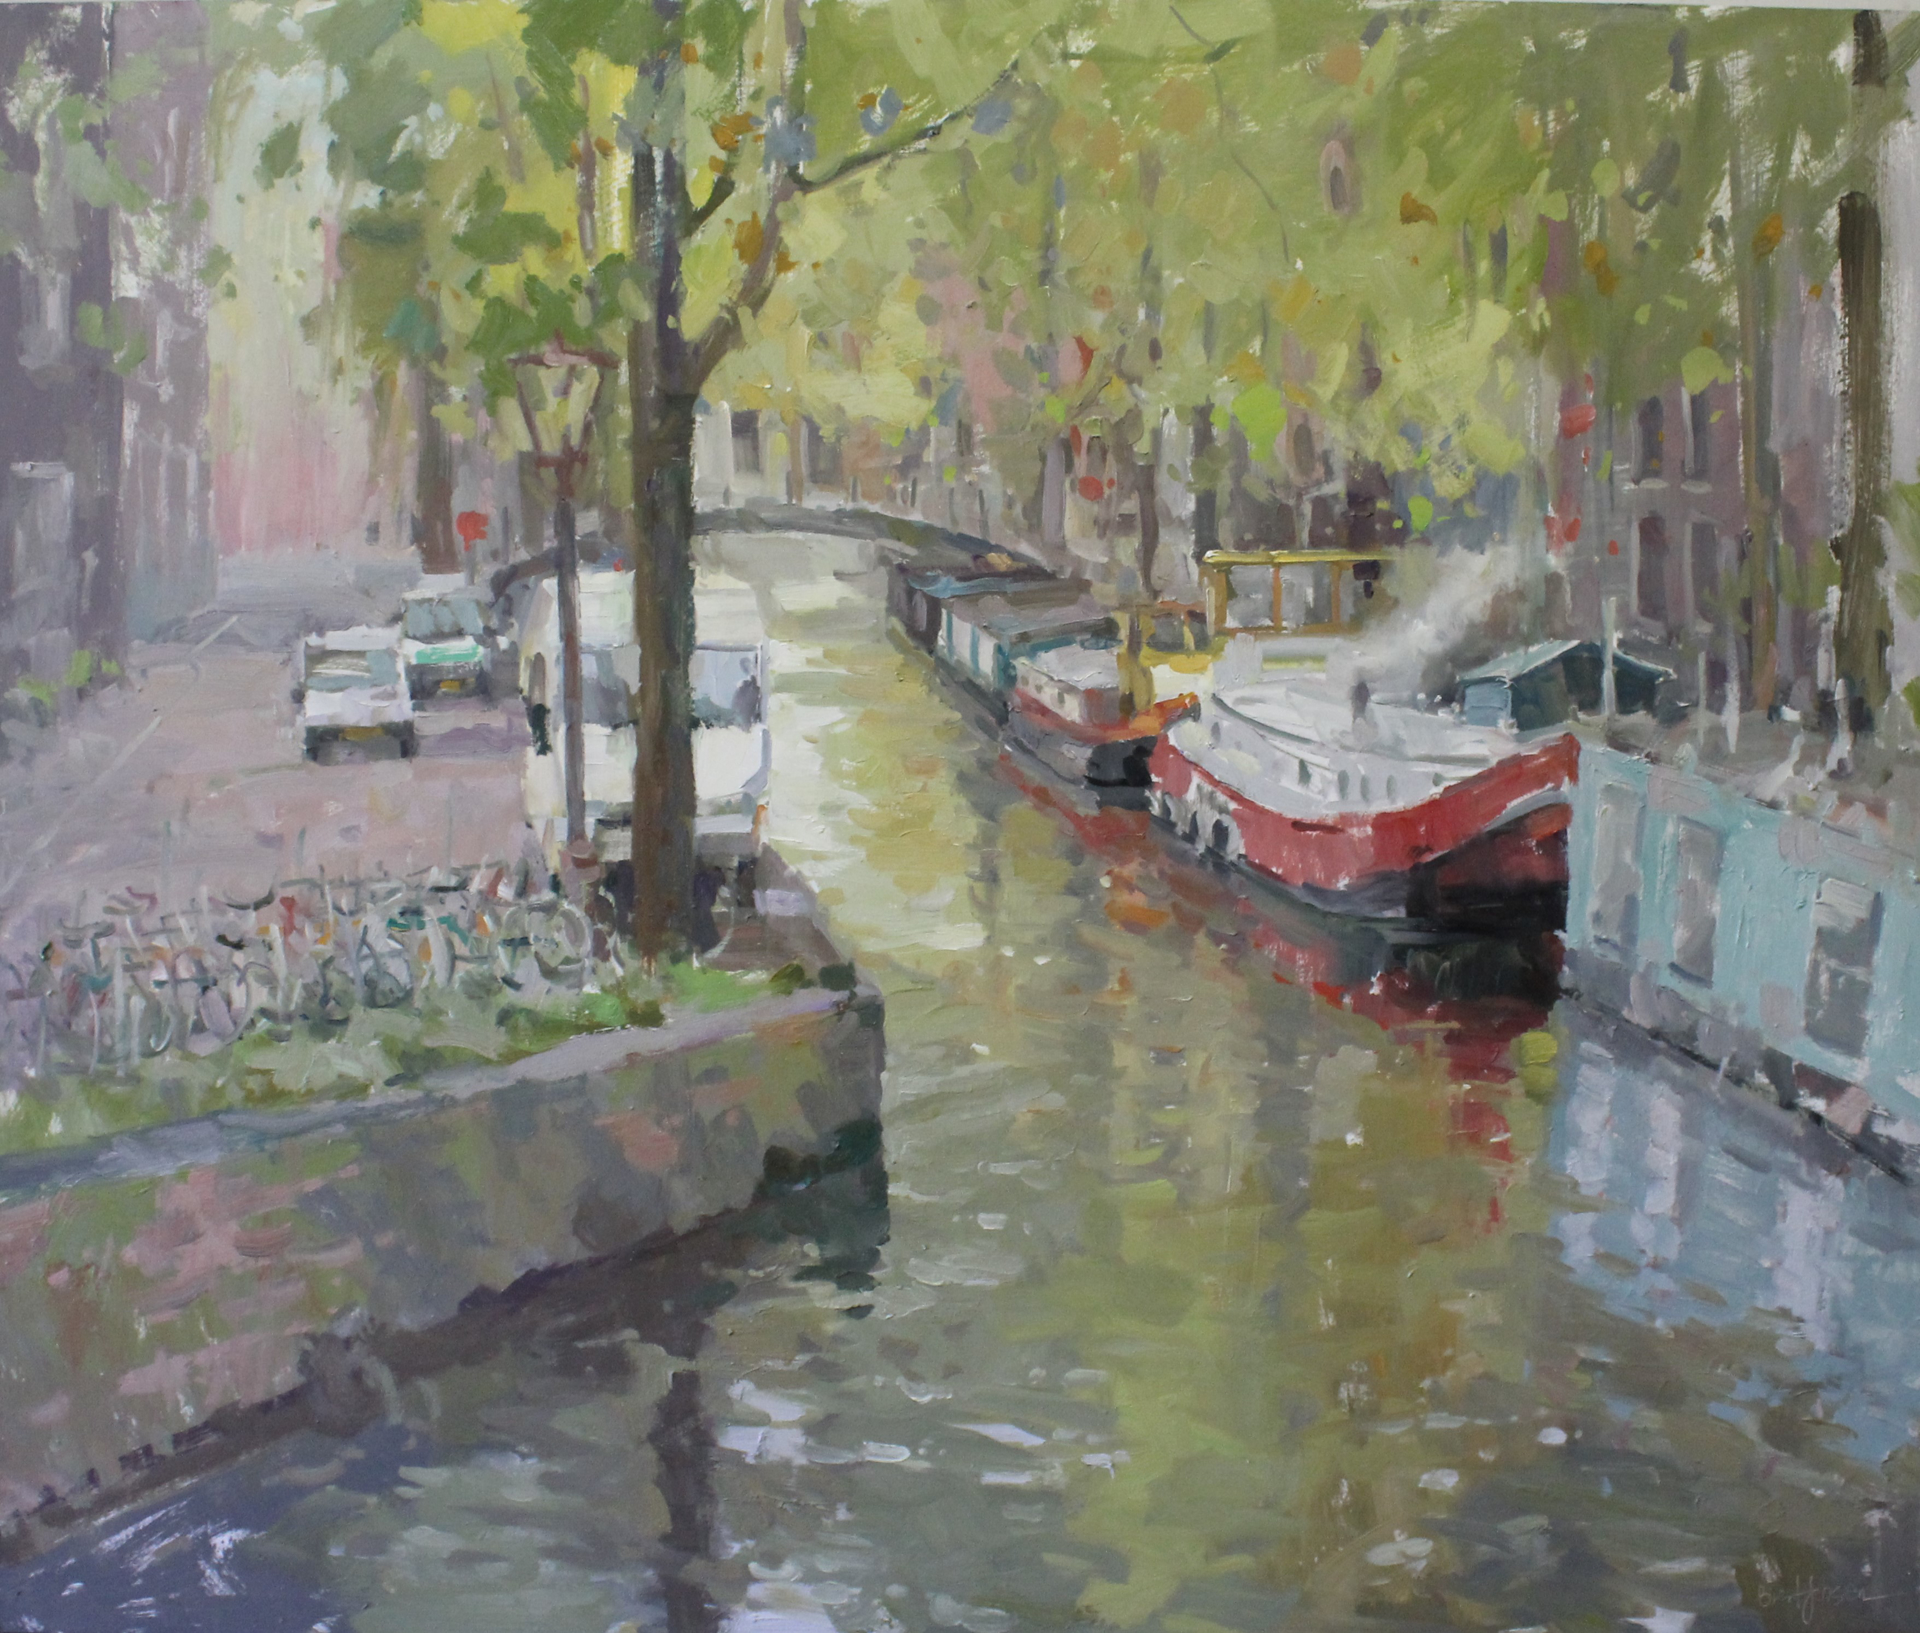 The Amsterdam Village Canal by Brent Jensen